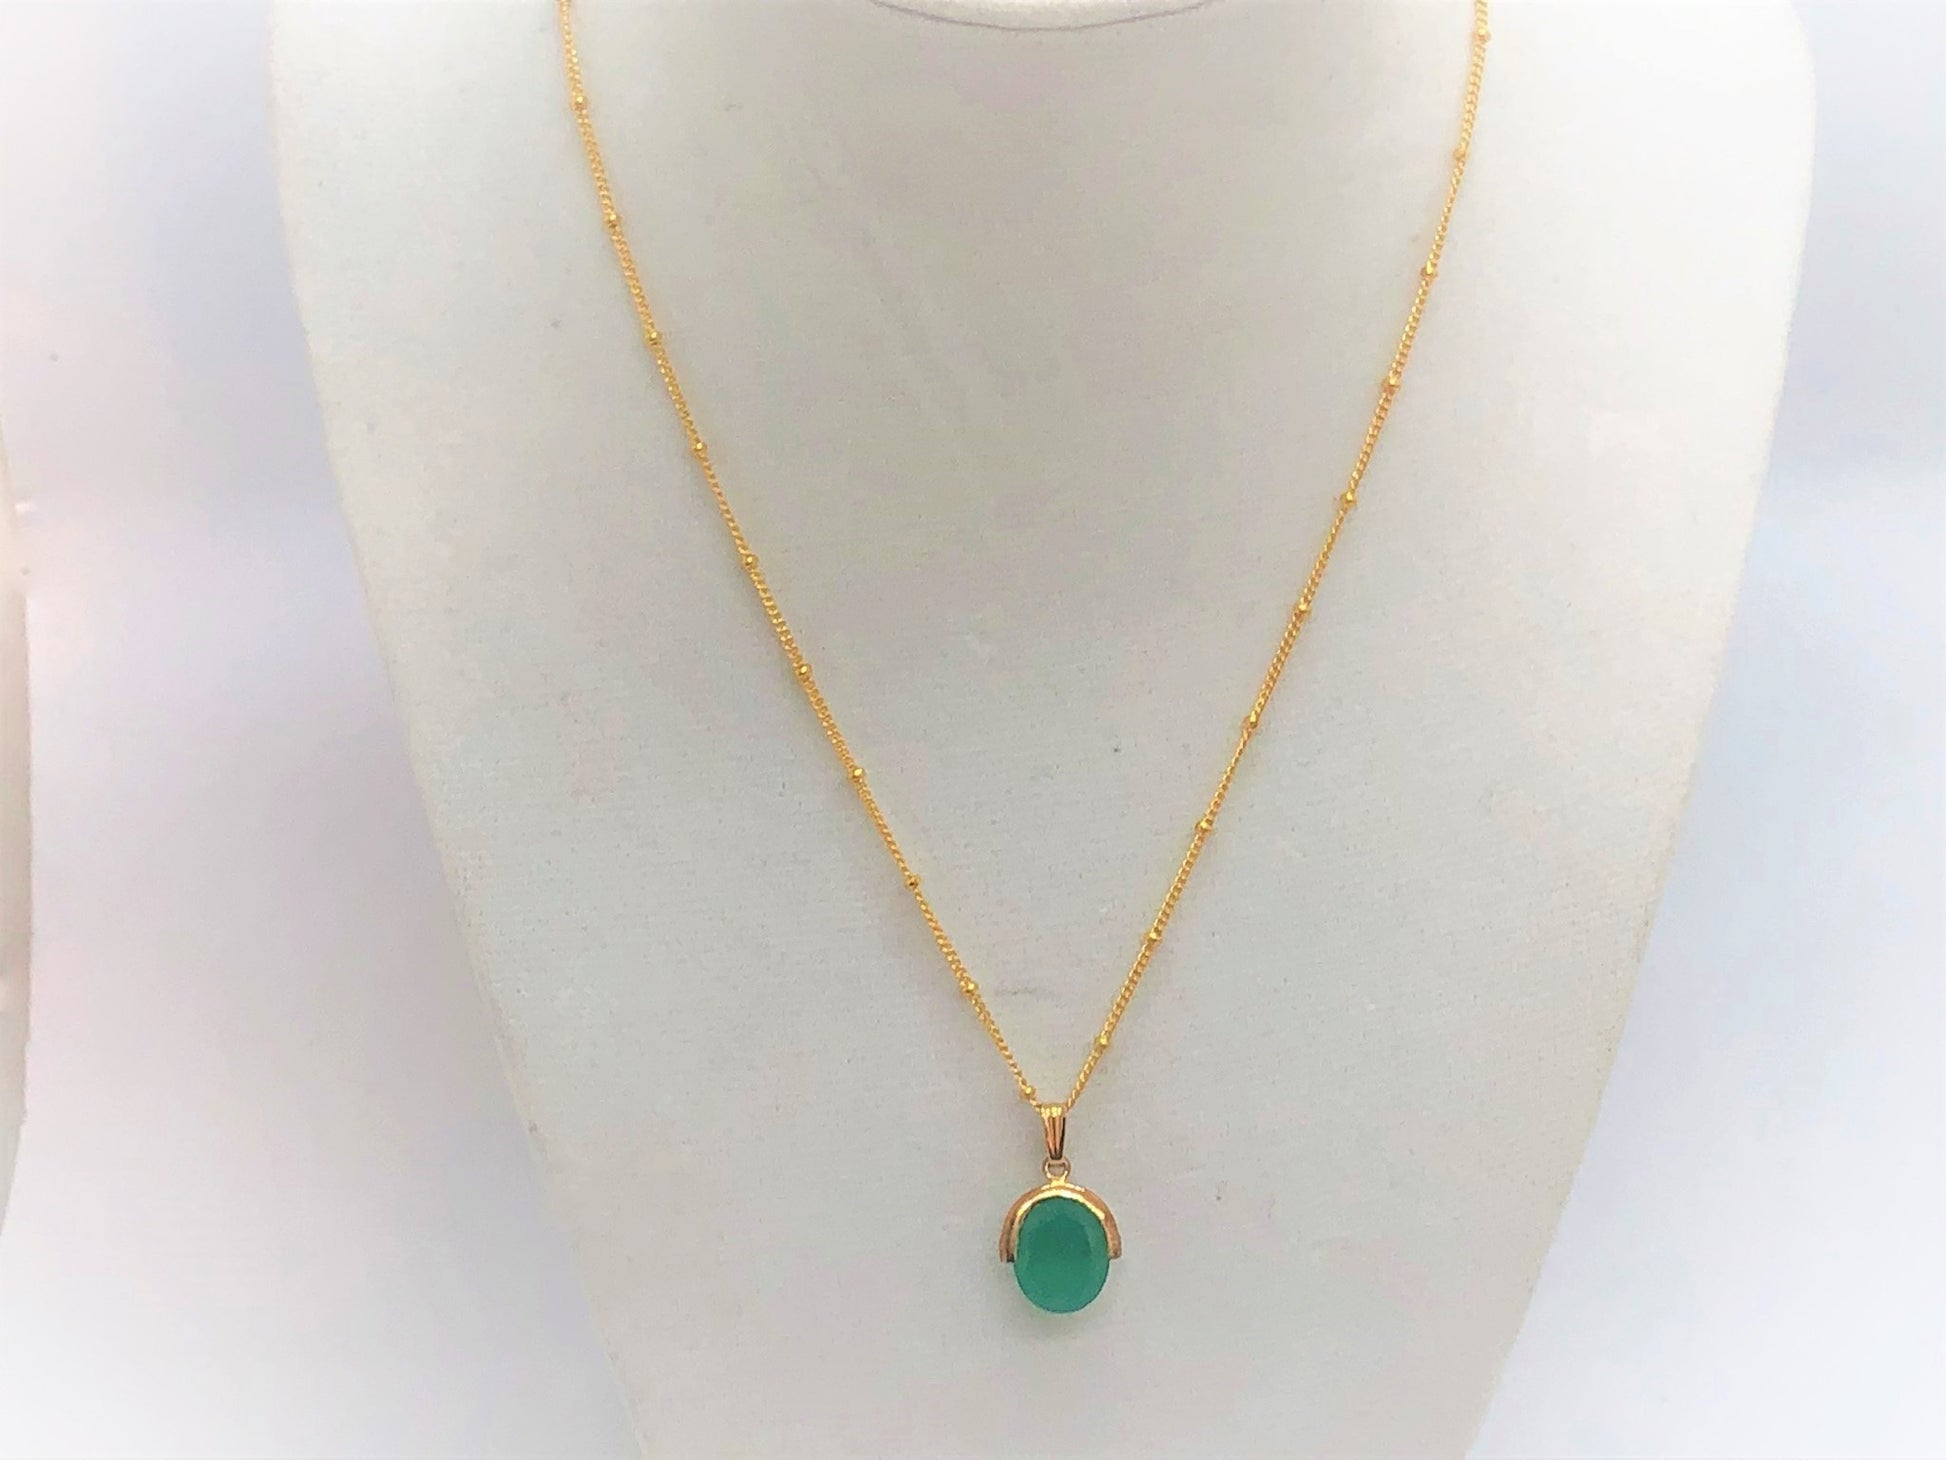 Gemstone Station Necklace - Emmis Jewelry, Necklace, [product_color]